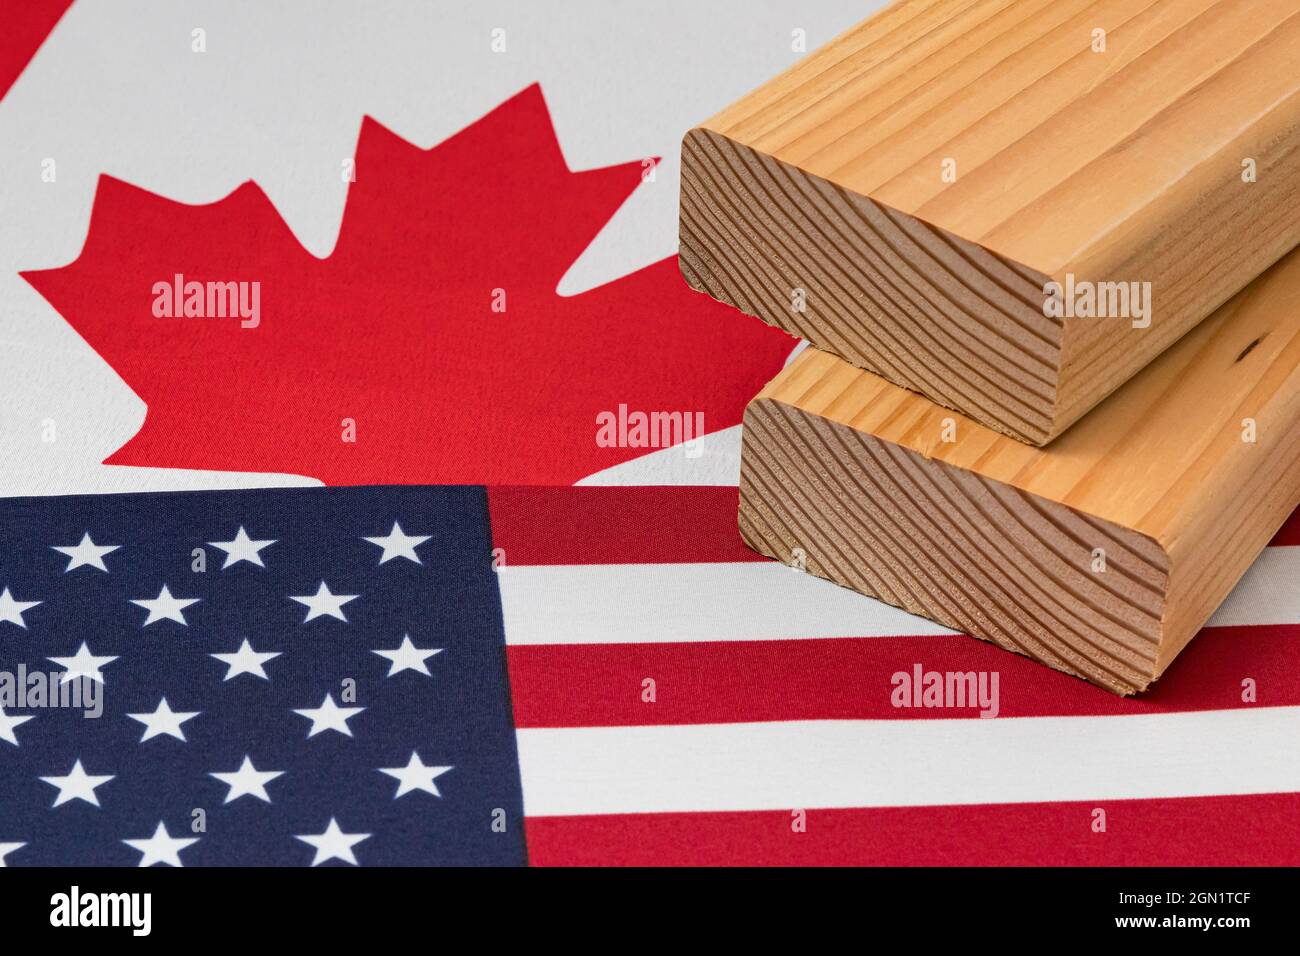 Softwood construction lumber on flag of Canada and United States of America. Trade war, tariffs, fair trade and lumber, logging industry concept Stock Photo